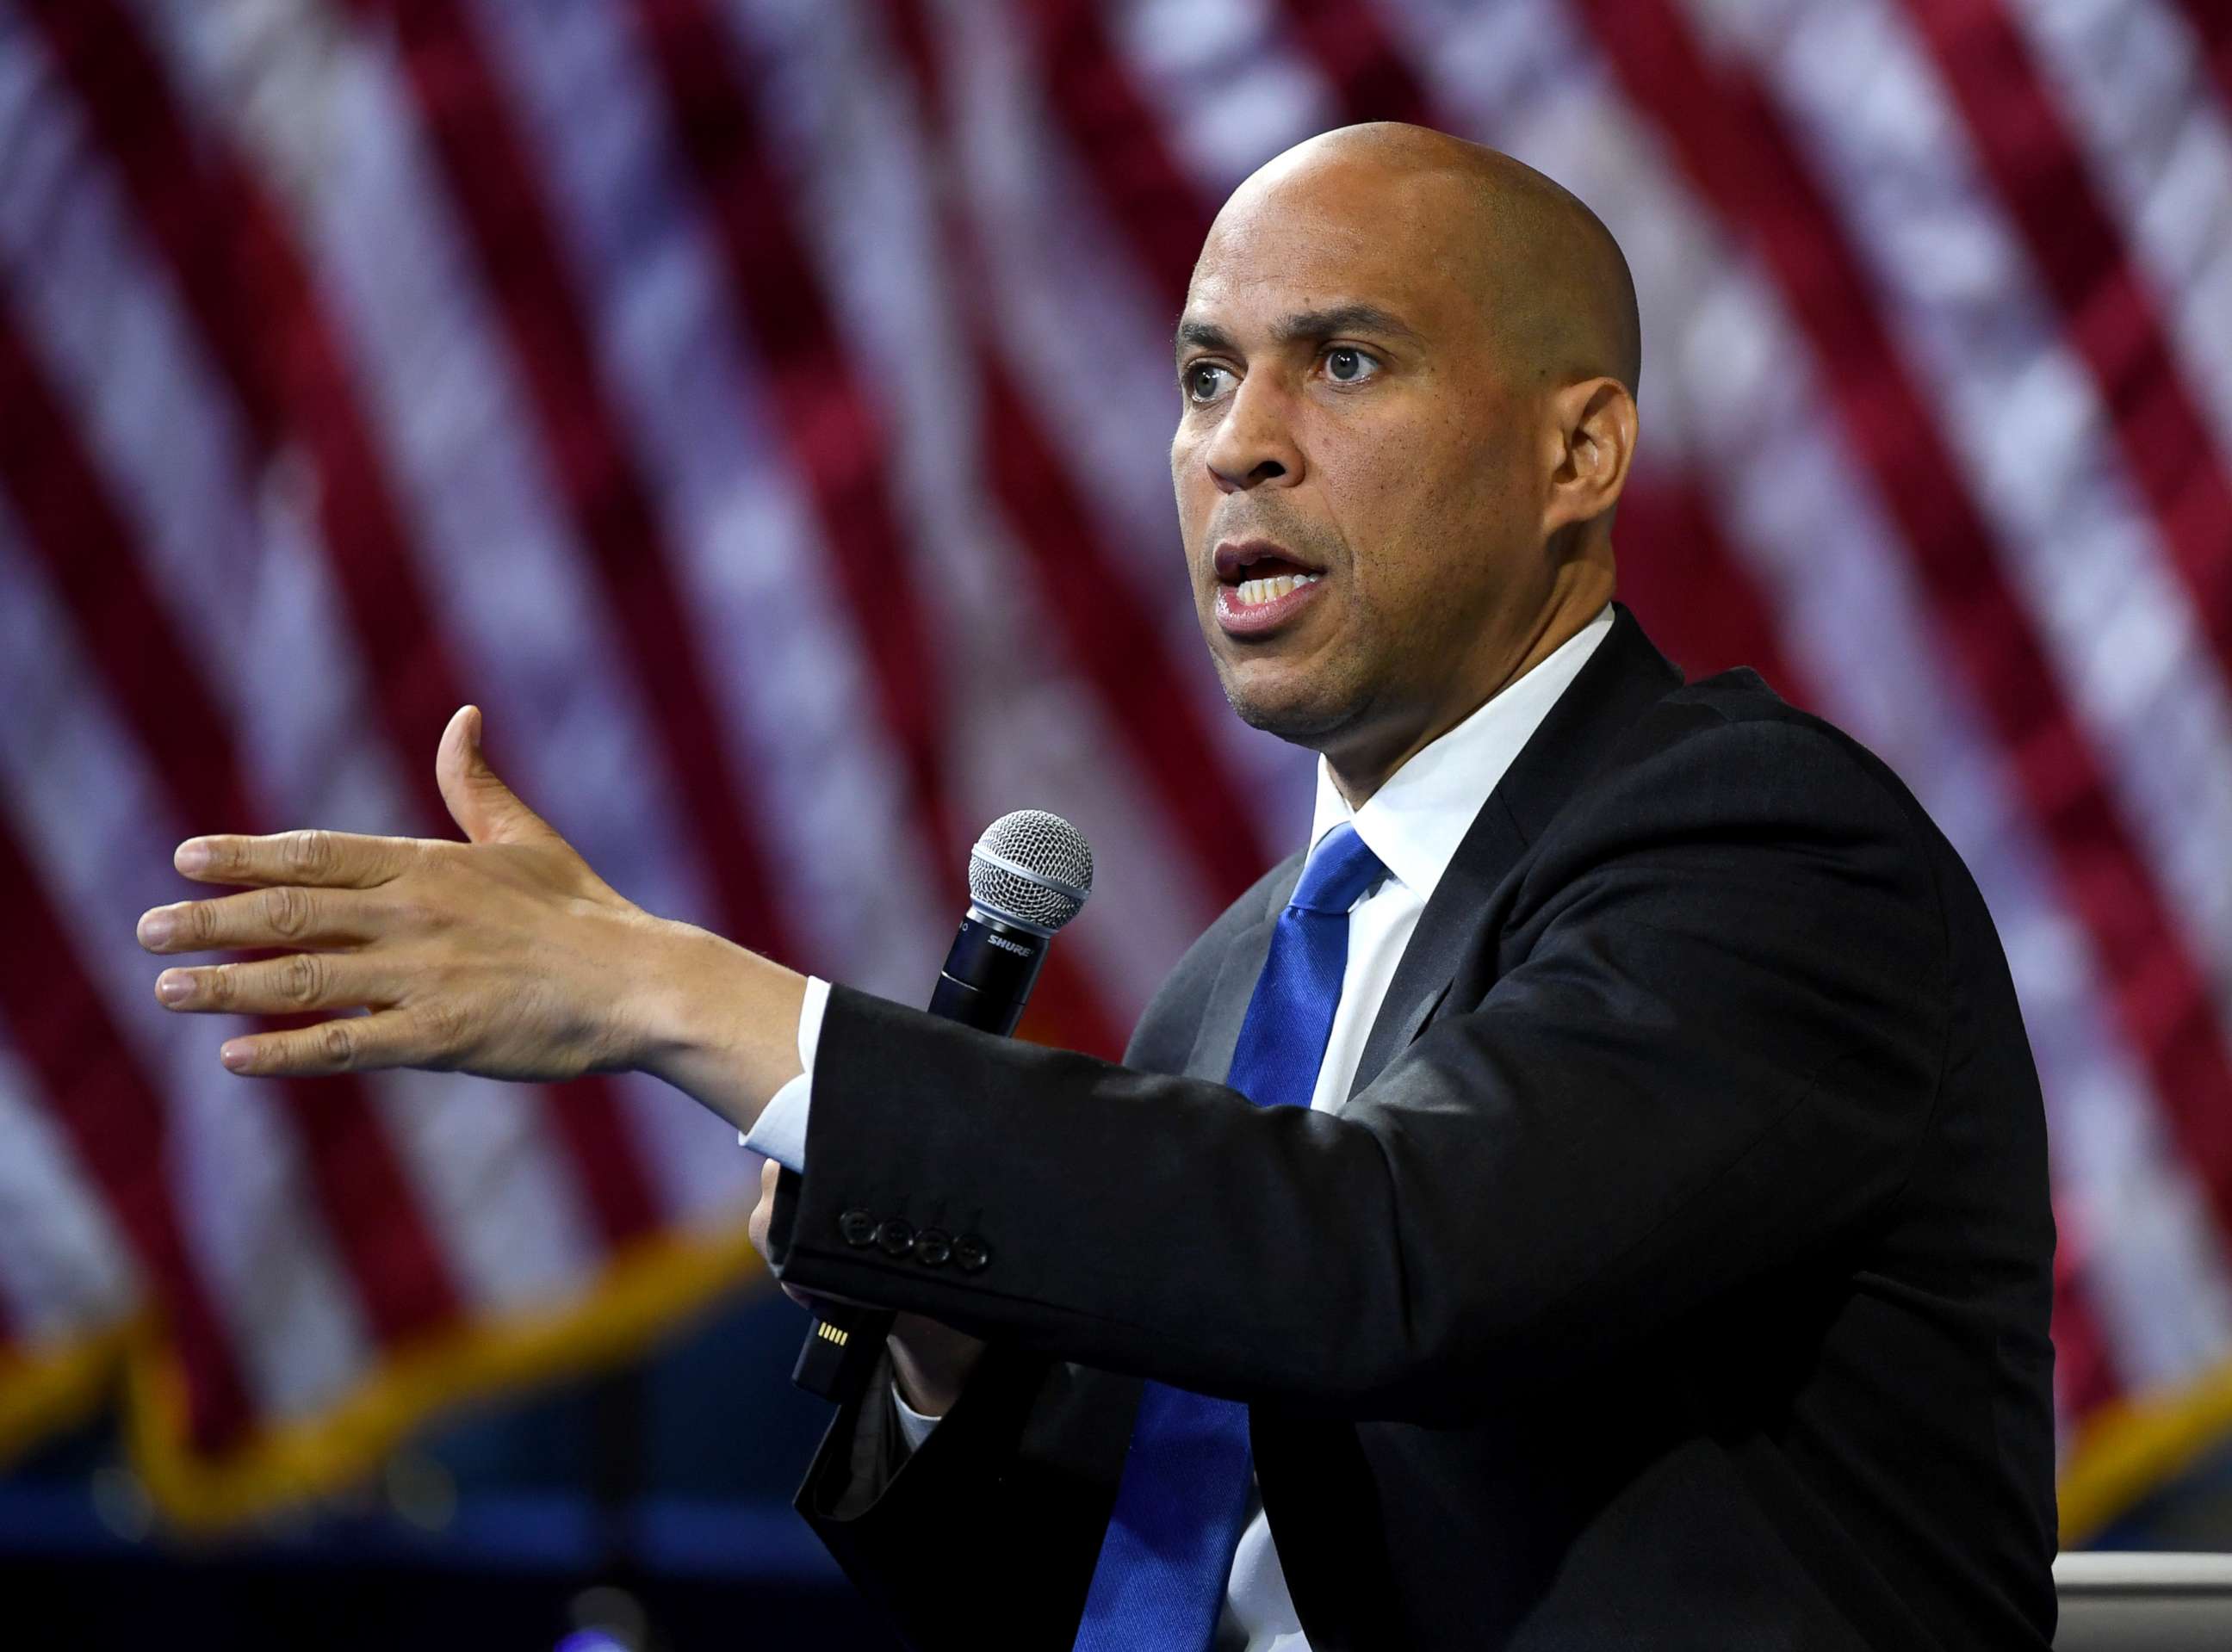 PHOTO: Democratic presidential hopeful, New Jersey Senator, Cory Booker speaks at the California Democratic Party 2019 Fall Endorsing Convention in Long Beach, Calif., Nov. 16, 2019.